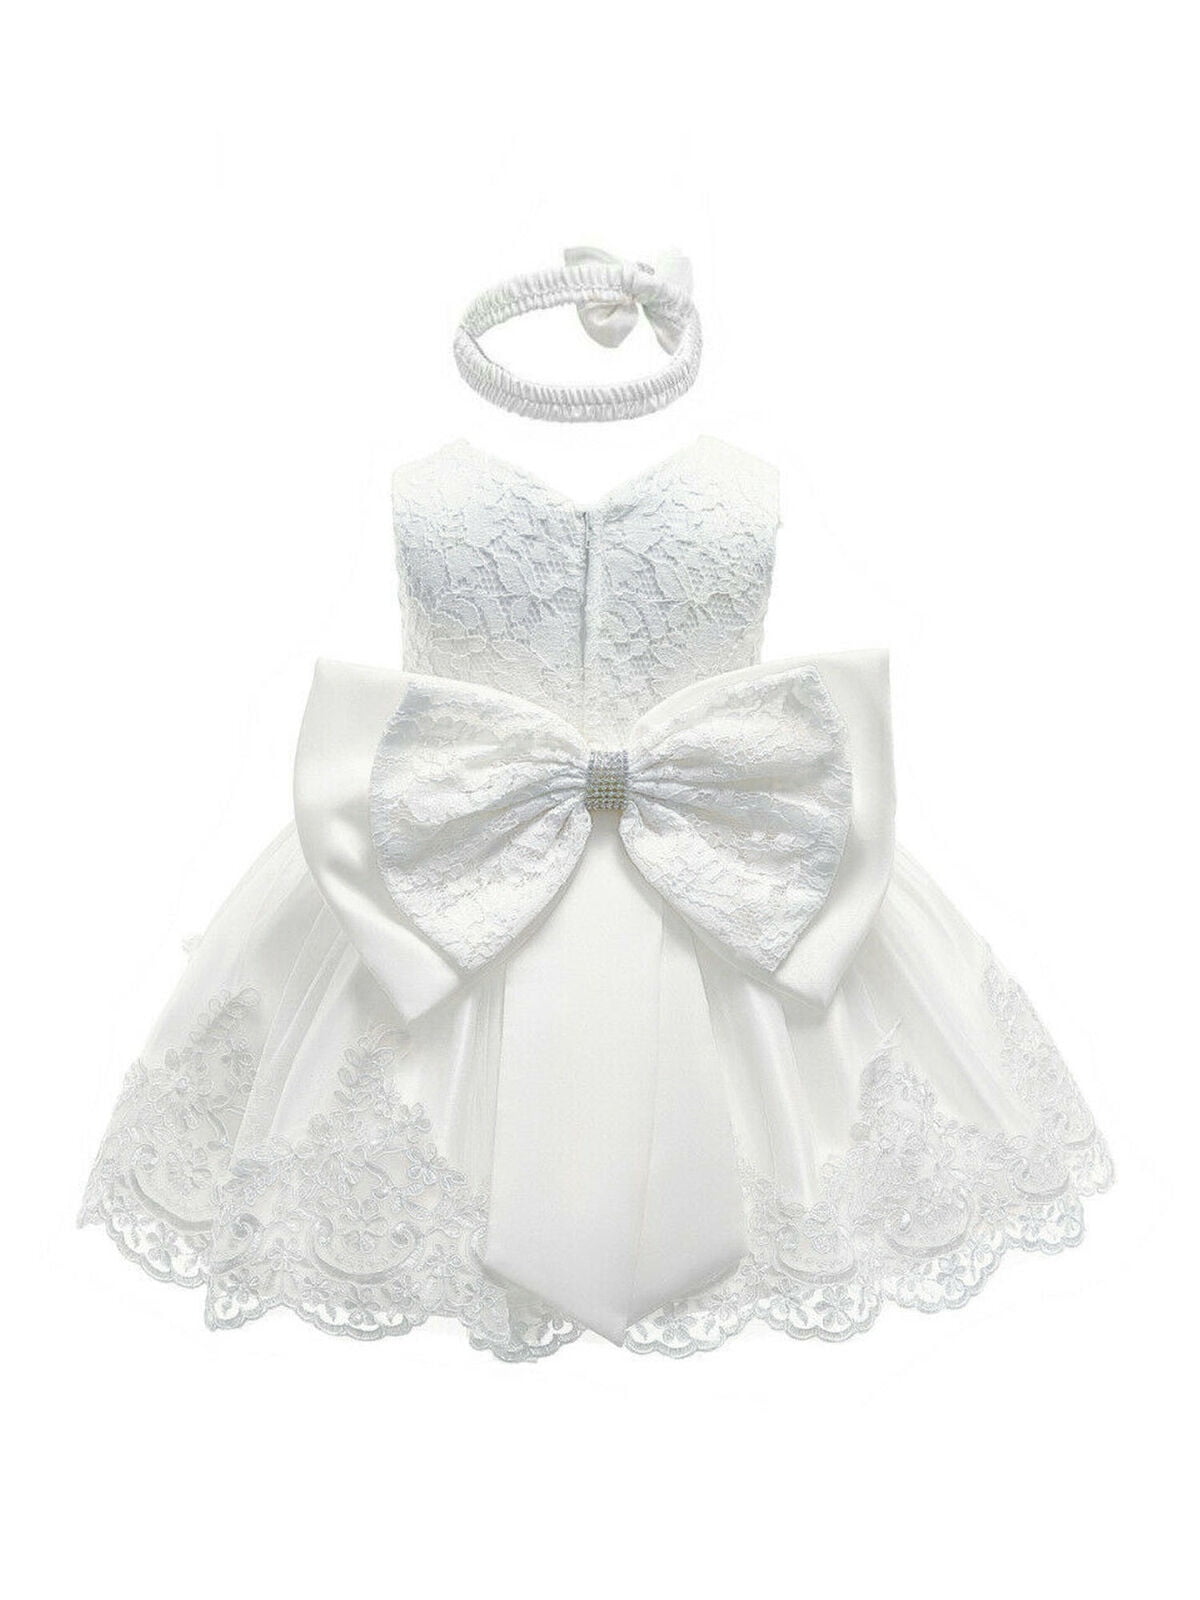 baby outfit toddler fancy dress Ivory tulle dress girl birthday party gown baptism dress